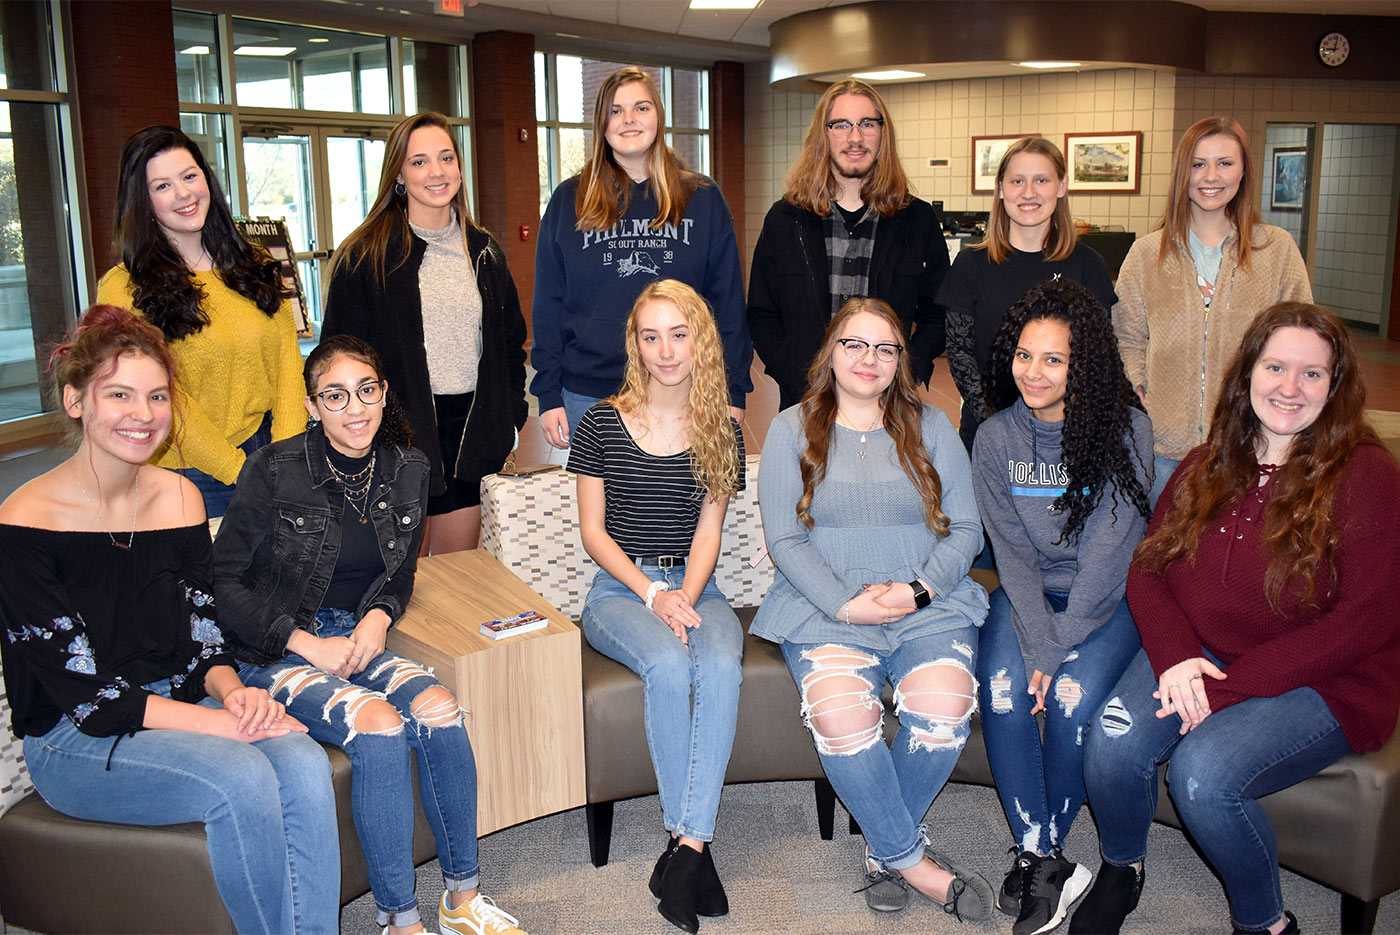 Pictured is the first class of Roane State Middle College students from Oak Ridge High School. Seated, from left: Aamariah Crow, Isabella Kelly, Chloe Mallett, Savannah Shropshire, Selena Sterling and Christina Thomas. Standing, from left: Caroline Webb, Katie Swigert, Haley Snyder, Jacob Wright, Shaelyn Deal and Cameille Schubert. Not pictured: Cameron Malone and Marissa Colvais.